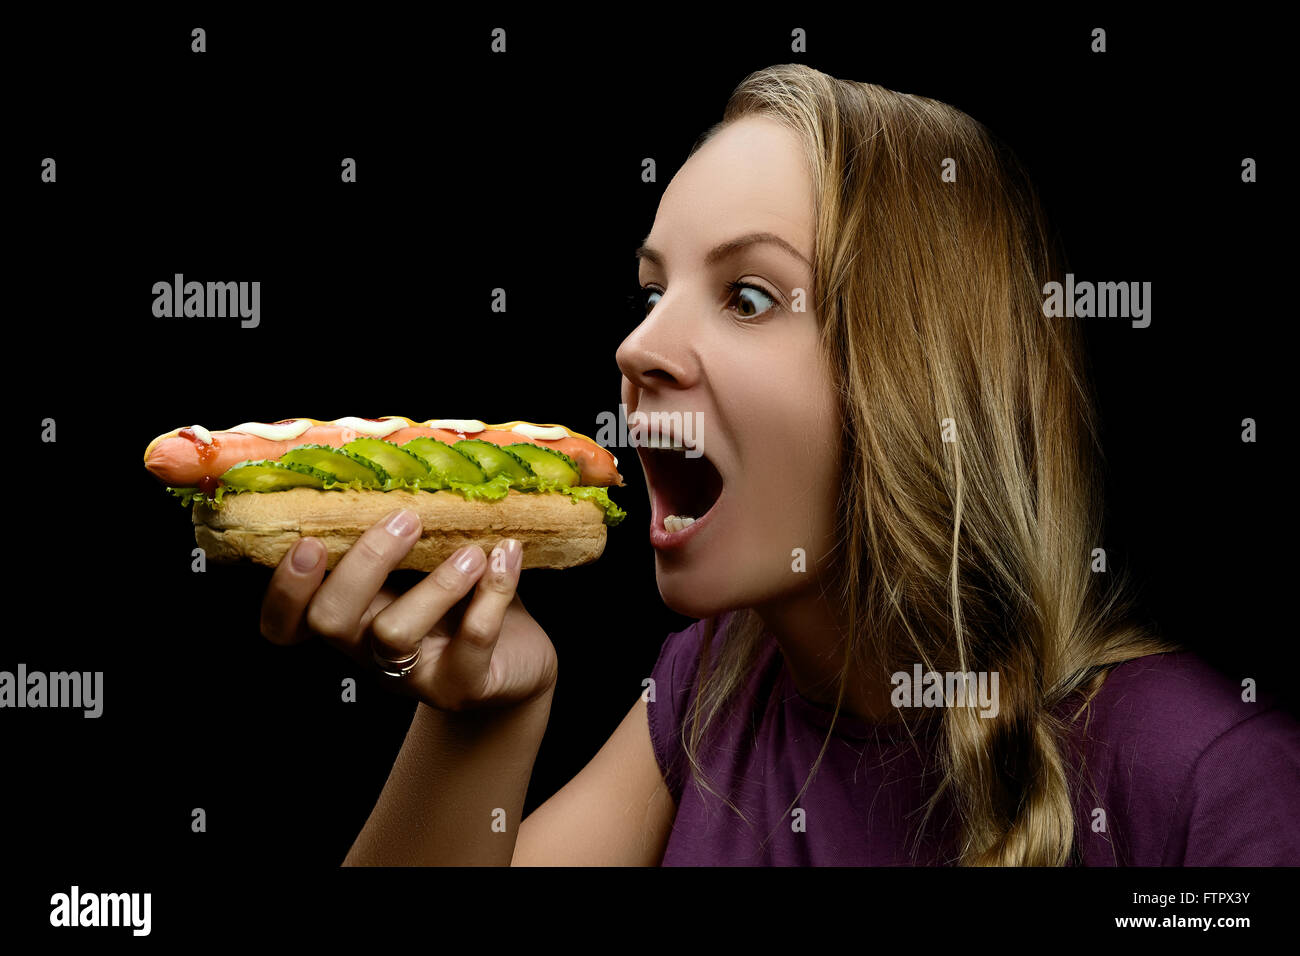 Young pretty girl eating a messy hotdog isolated on black background Stock Photo